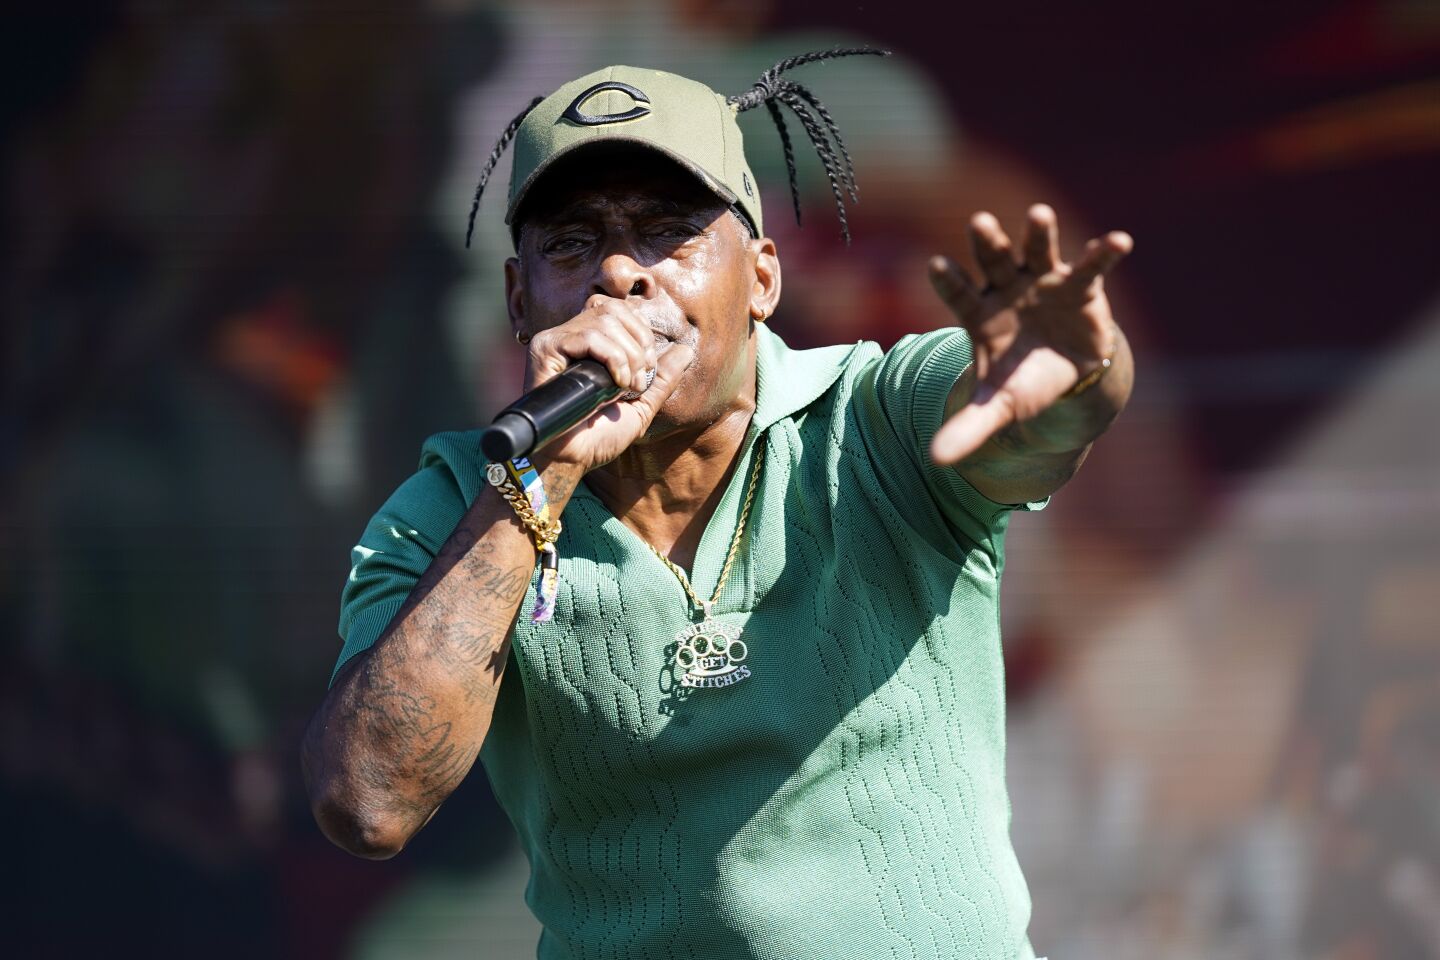 Coolio, who began building his network in Los Angeles’ rap scene in the early '90s and at one point was the biggest rap star on the planet, died at 59. In 1994, Coolio had his breakthrough hit, “Fantastic Voyage,” a track that crossed over to pop audiences while establishing him as someone with verifiable street cred. But the Compton-raised artist is perhaps best known for “Gangsta’s Paradise,” the title song from his sophomore album in 1995. The track, which was nominated for record of the year, transcended mediums, landing a spot in the 1995 film “Dangerous Minds.” Later in his career, Coolio was a lot of things, including reality TV star, cook, cookbook author, and the potential mayor of his hometown.